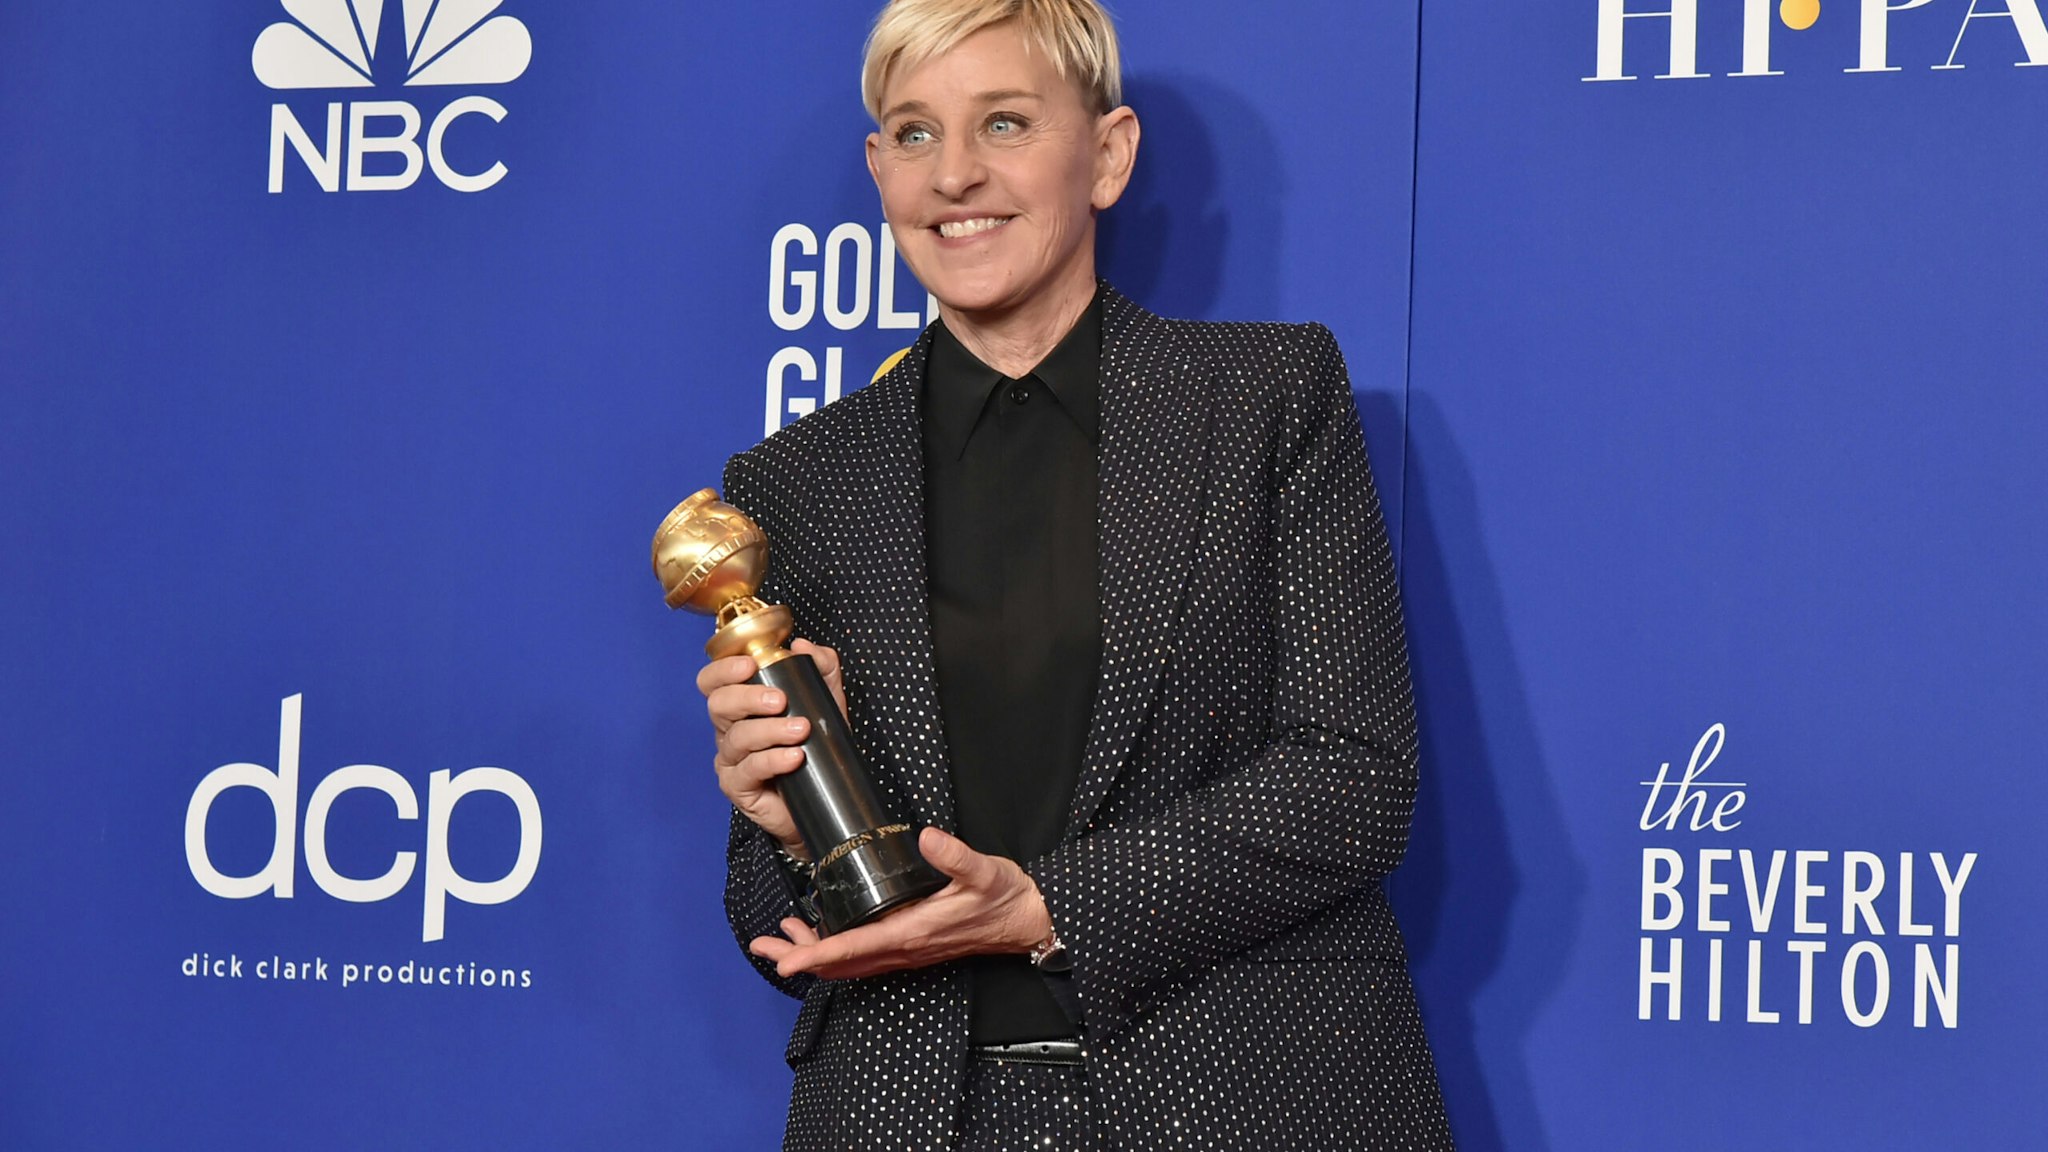 Ellen DeGeneres attends The 77th Golden Globes Awards - Press Room at The Beverly Hilton Hotel on January 05, 2020 in Beverly Hills, California.